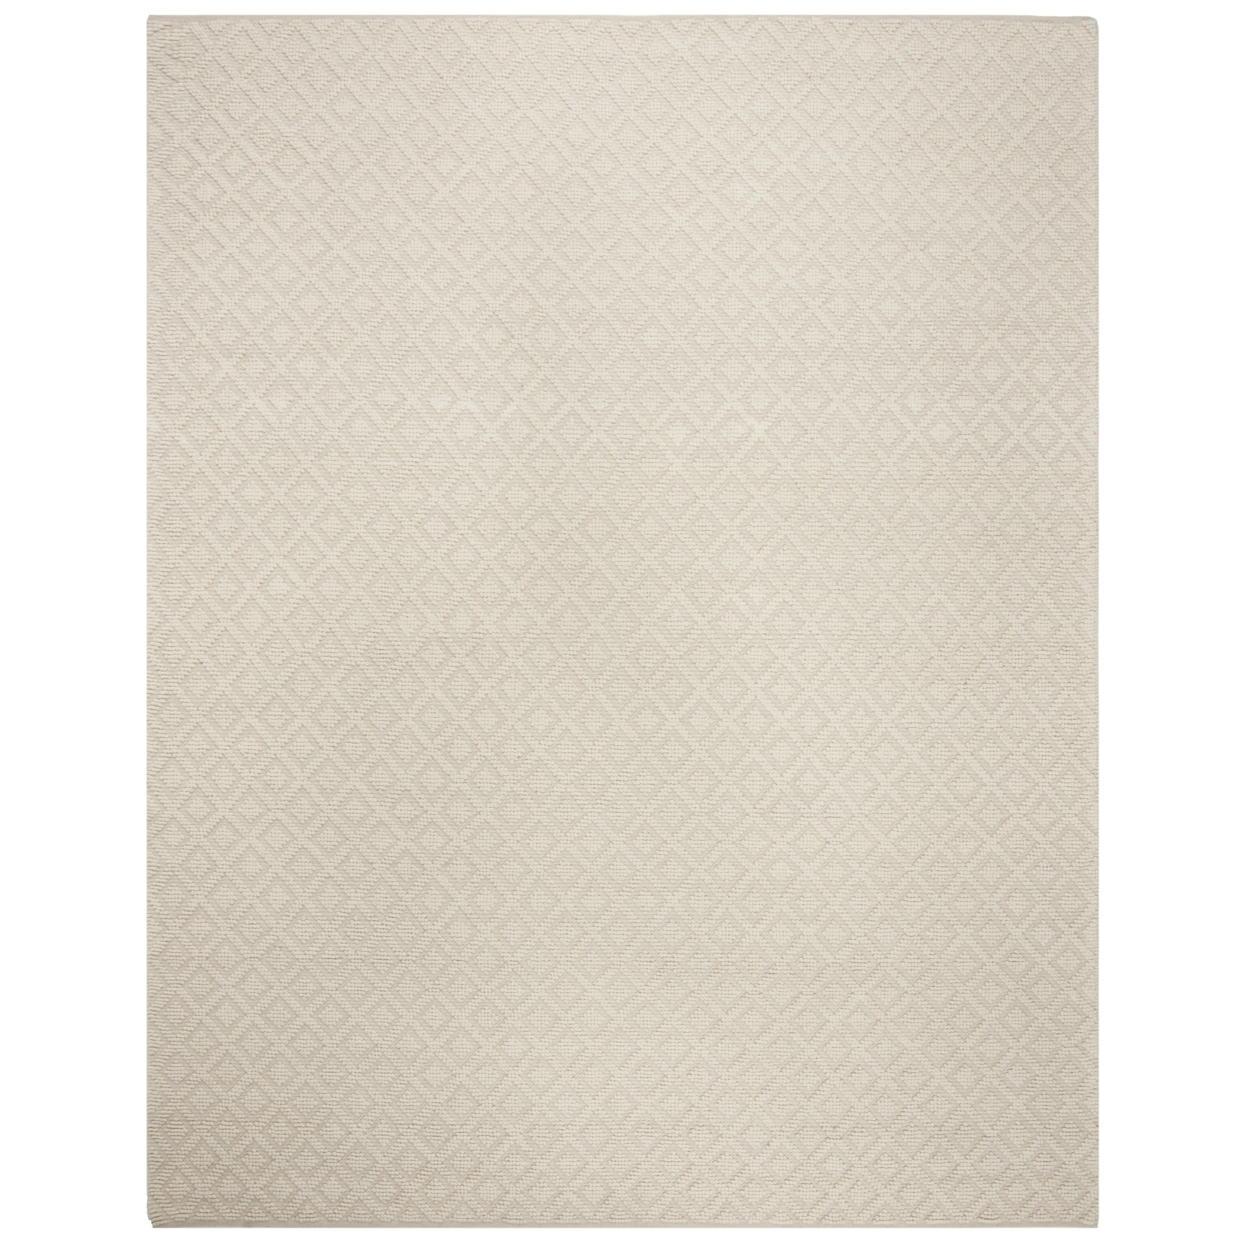 SAFAVIEH Vermont Collection VRM104A Handwoven Ivory Rug - 9 X 12